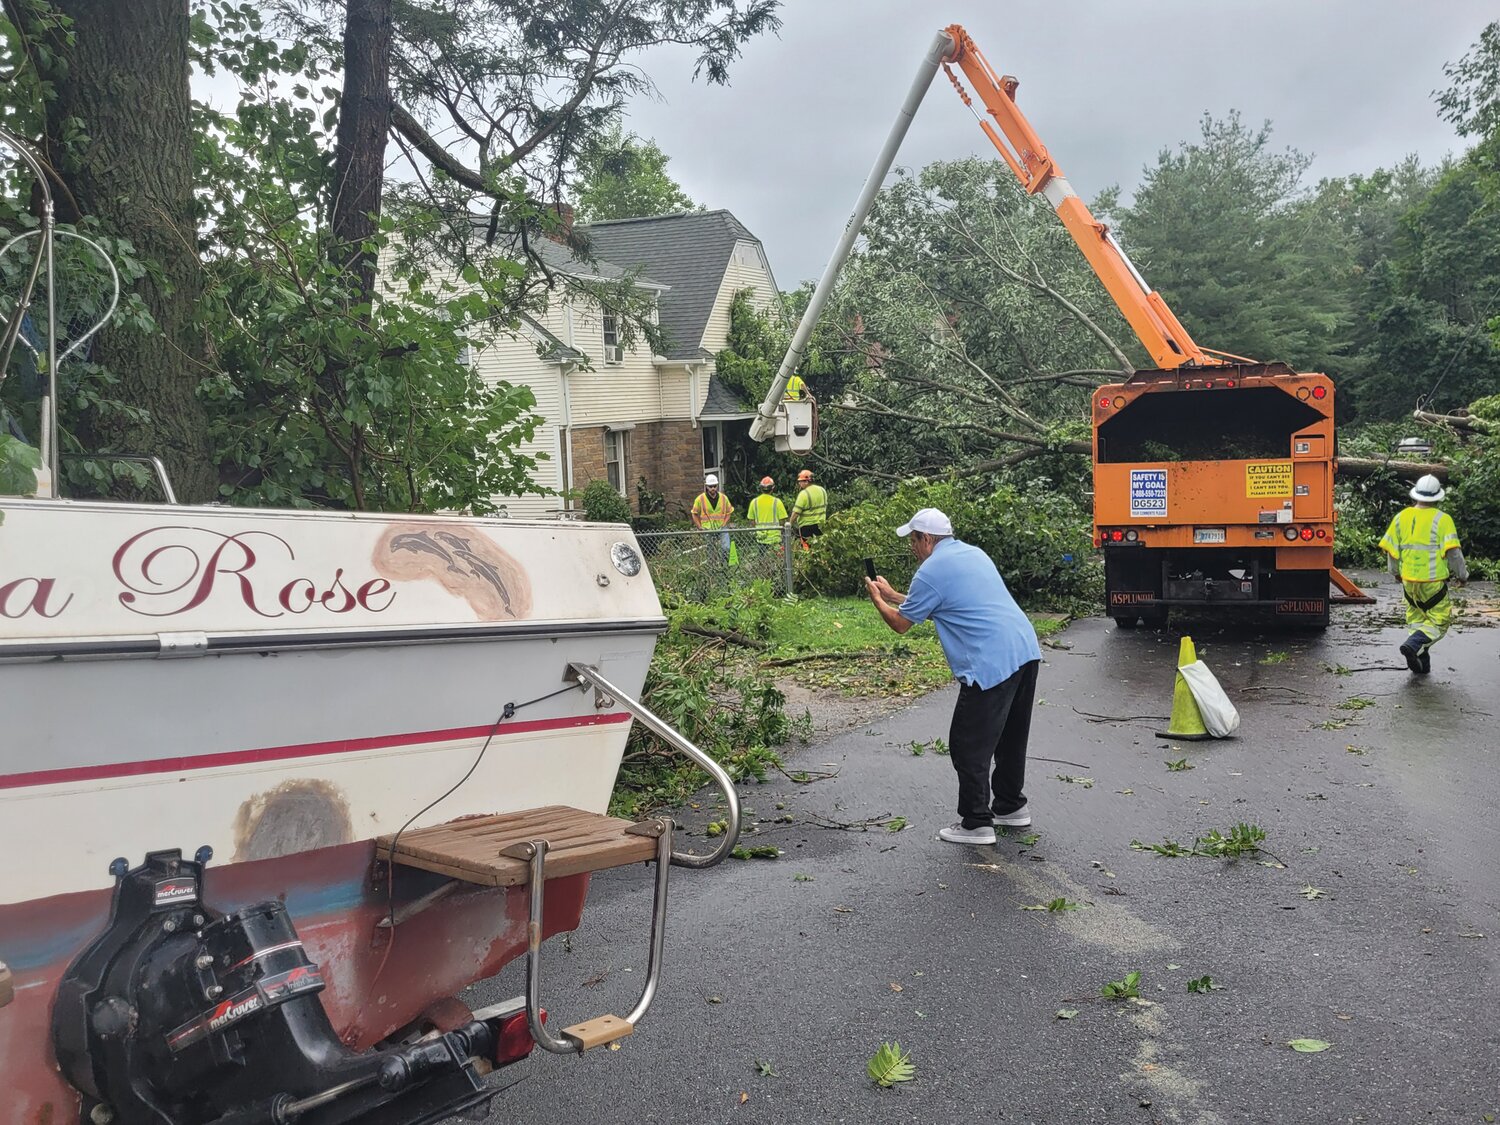 BOAT LOAD OF DAMAGE: This boat was tossed into the trees, and a few trees fell onto Amber Street houses. Residents were unable to exit via George Waterman for hours following the storm.